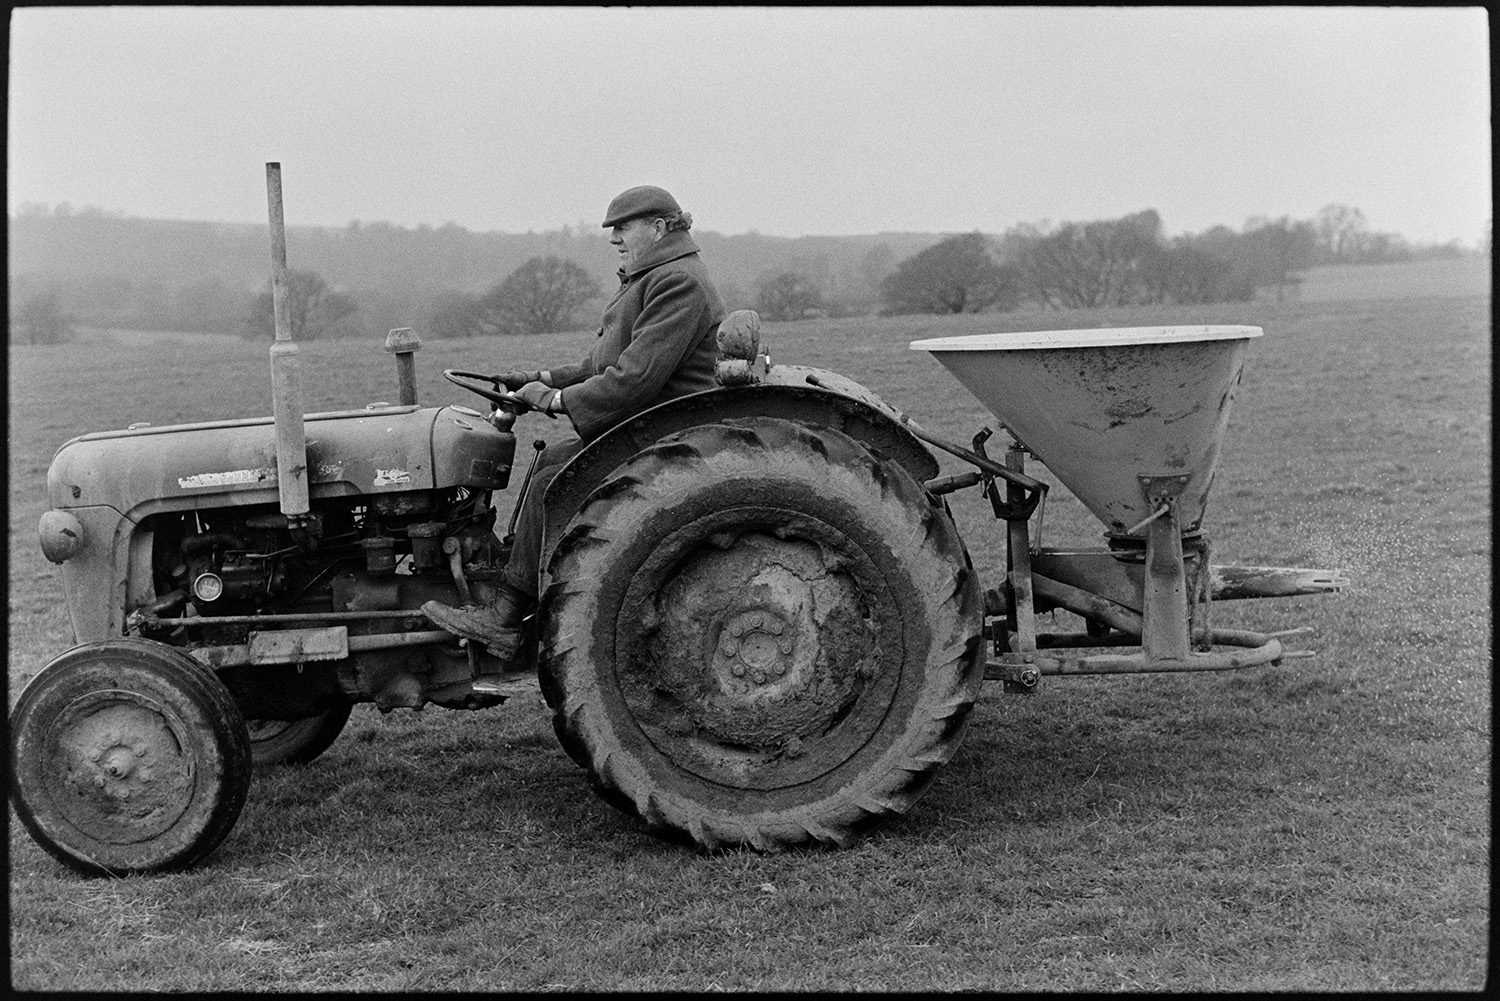 Man loading up and spreading fertilizer. <br />
[John Ward driving a tractor and spreading fertilizer in a field at Parsonage, Iddesleigh.]